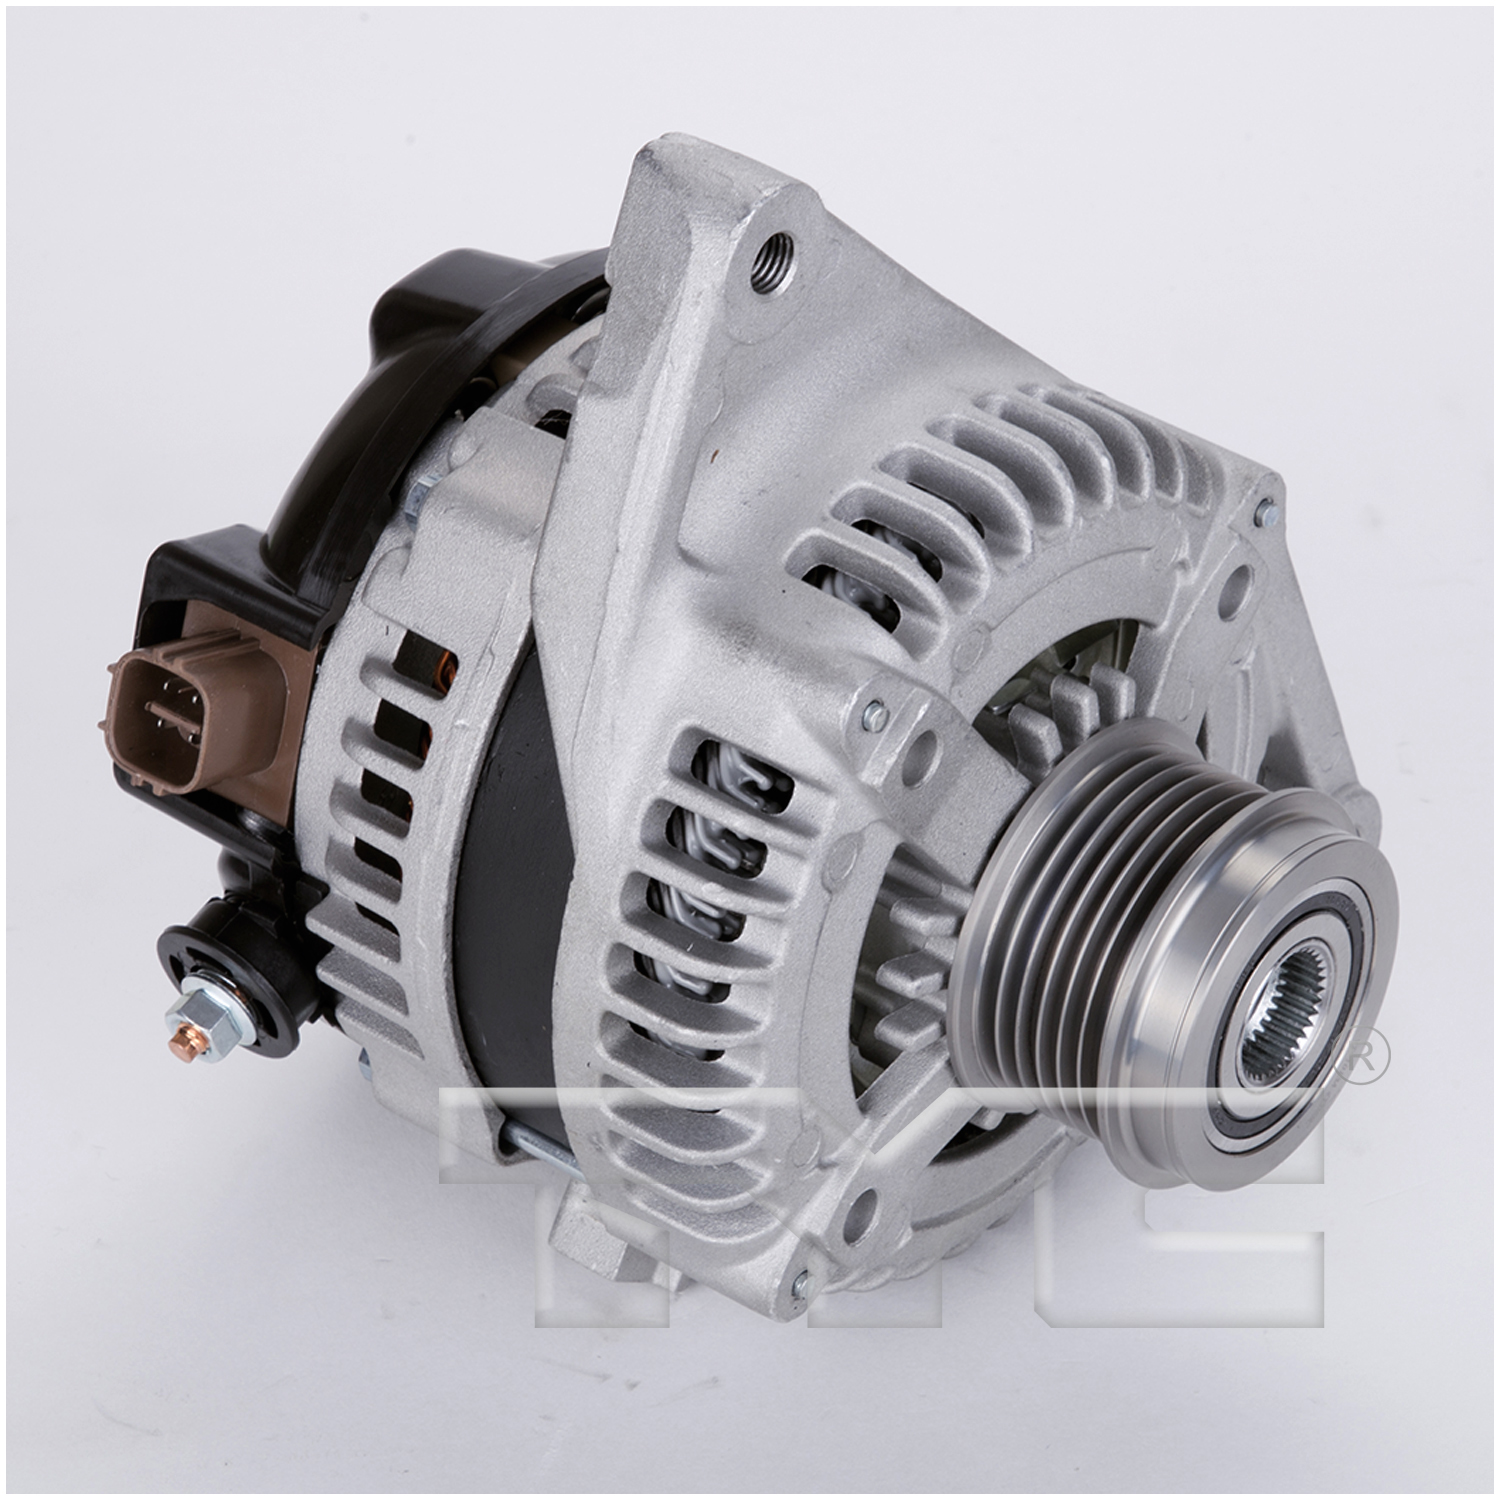 TYC-2-11402_NEW TYC ALTERNATOR FOR 12V 100AMP DENSO SC (HAIRPIN) FOR TOYOTA APPLICATIONS